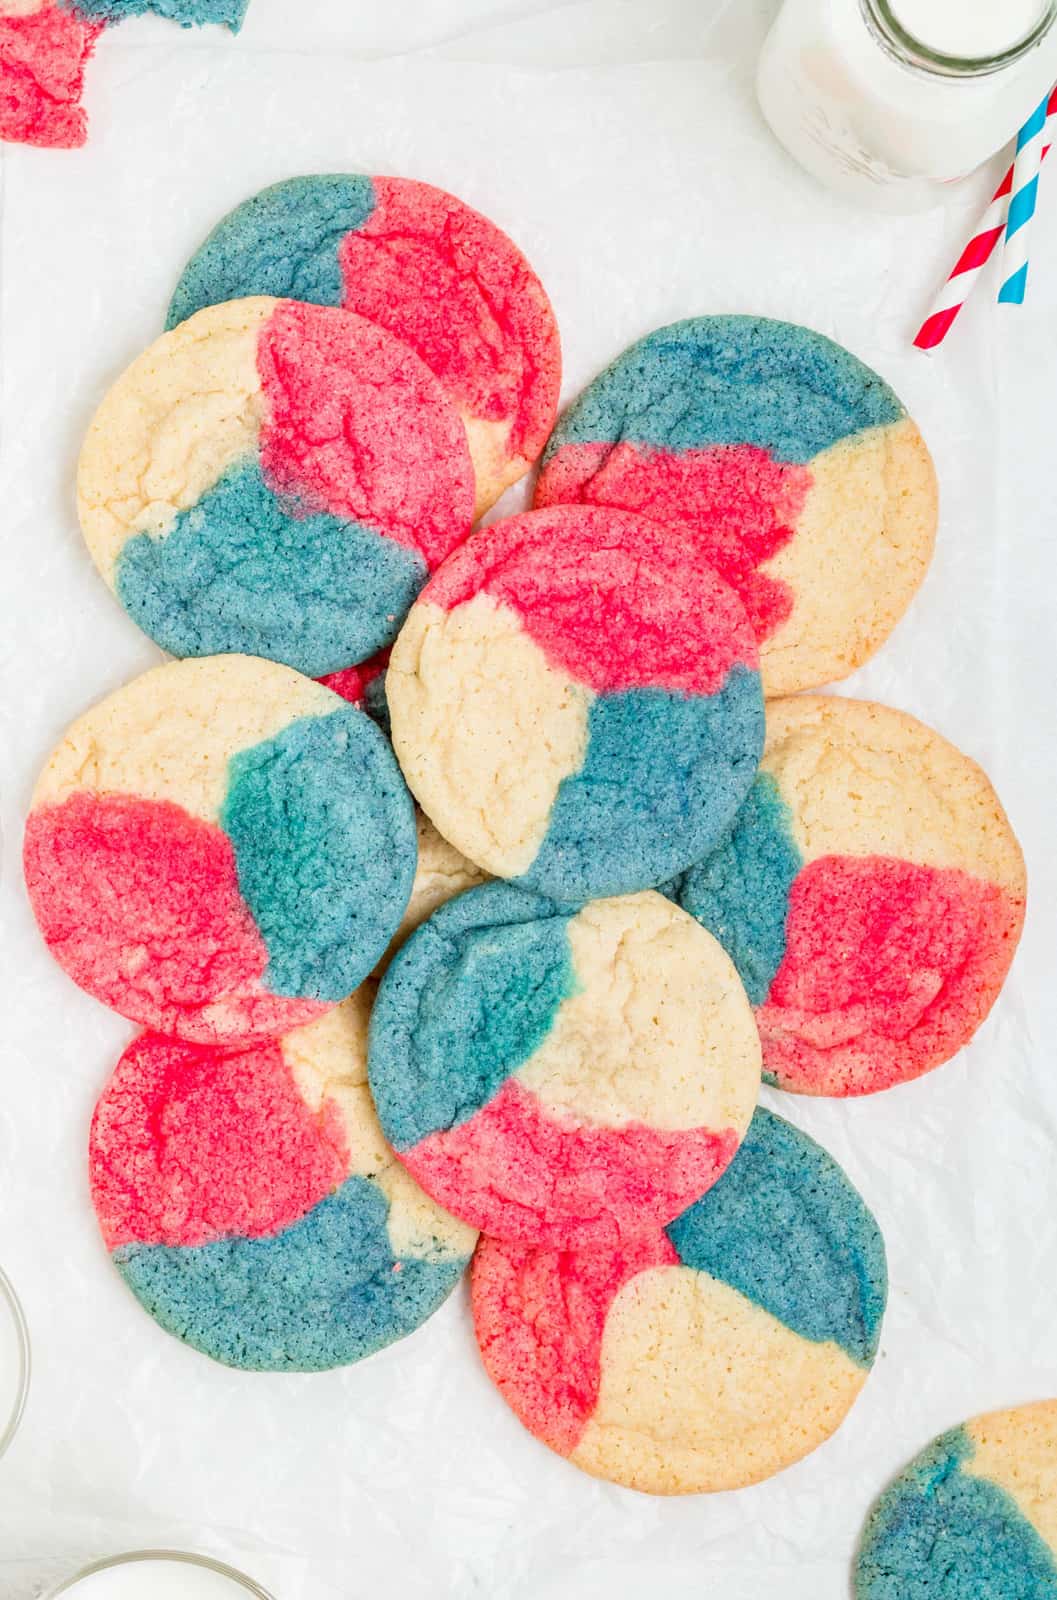 Overhead of layered Red White & Blue Cookies on top of one another.